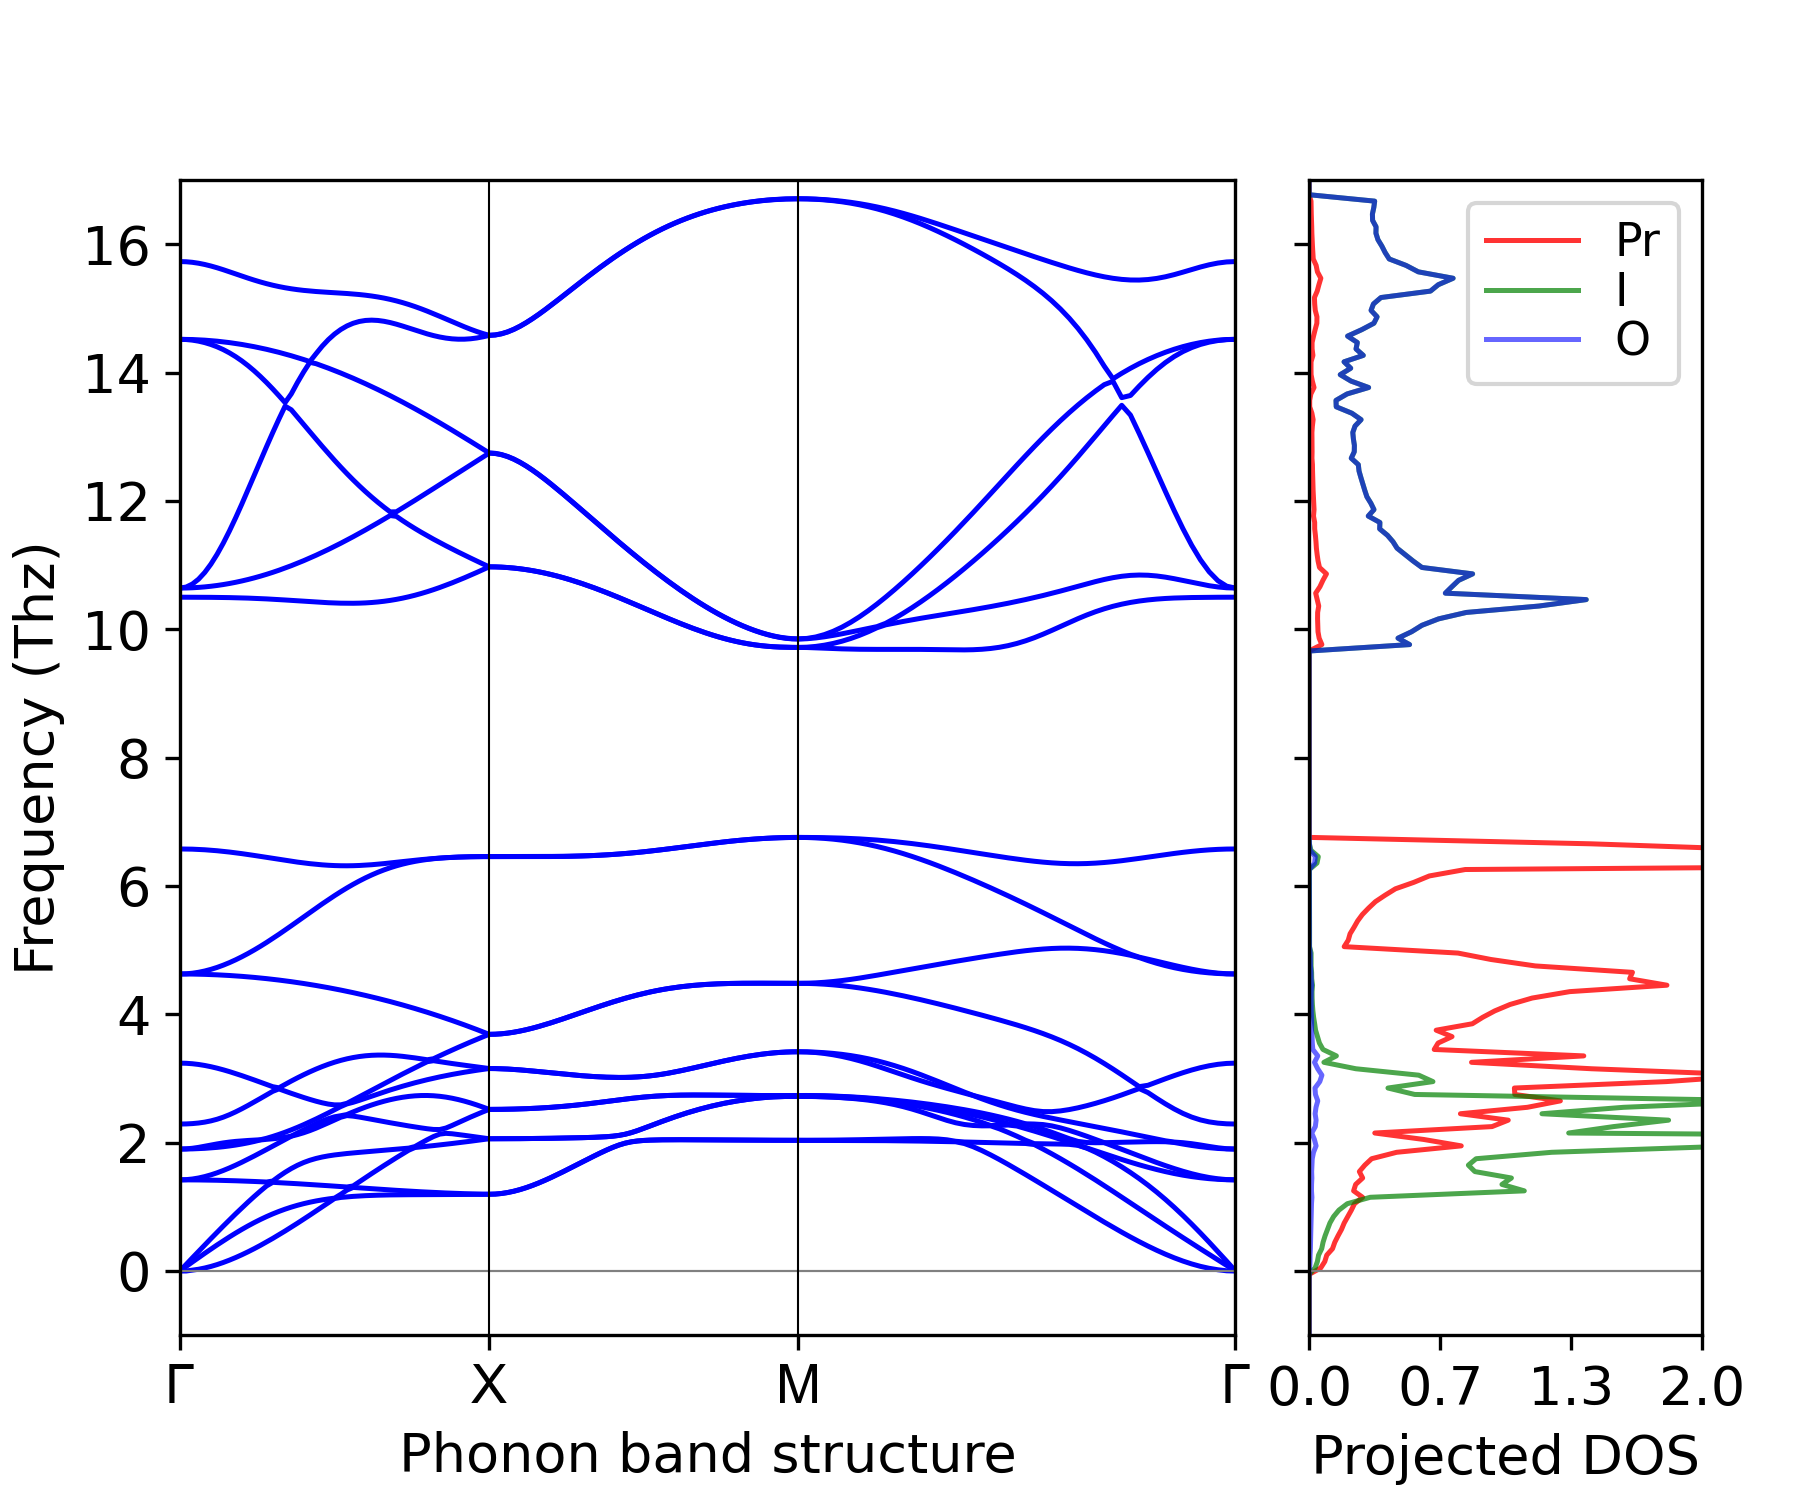 ../_images/phonon_BAND_LDOS-PrIO_P4^nmm.png